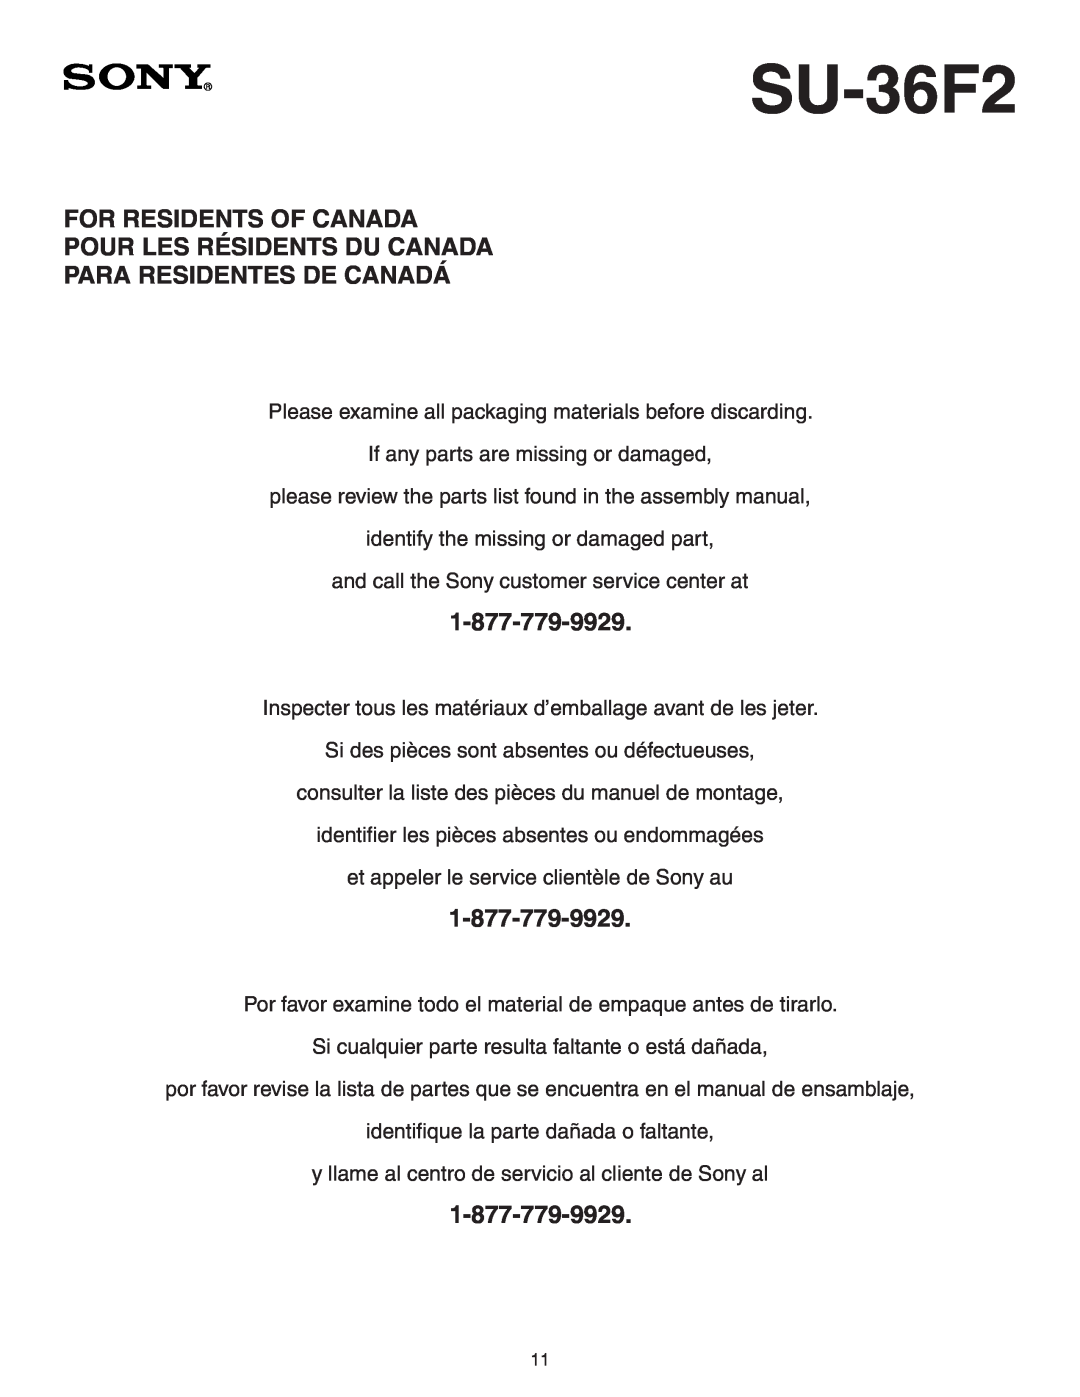 Sony SU-36F2 manual For Residents Of Canada, Pour Les Résidents Du Canada, Para Residentes De Canadá, 1-877-779-9929 